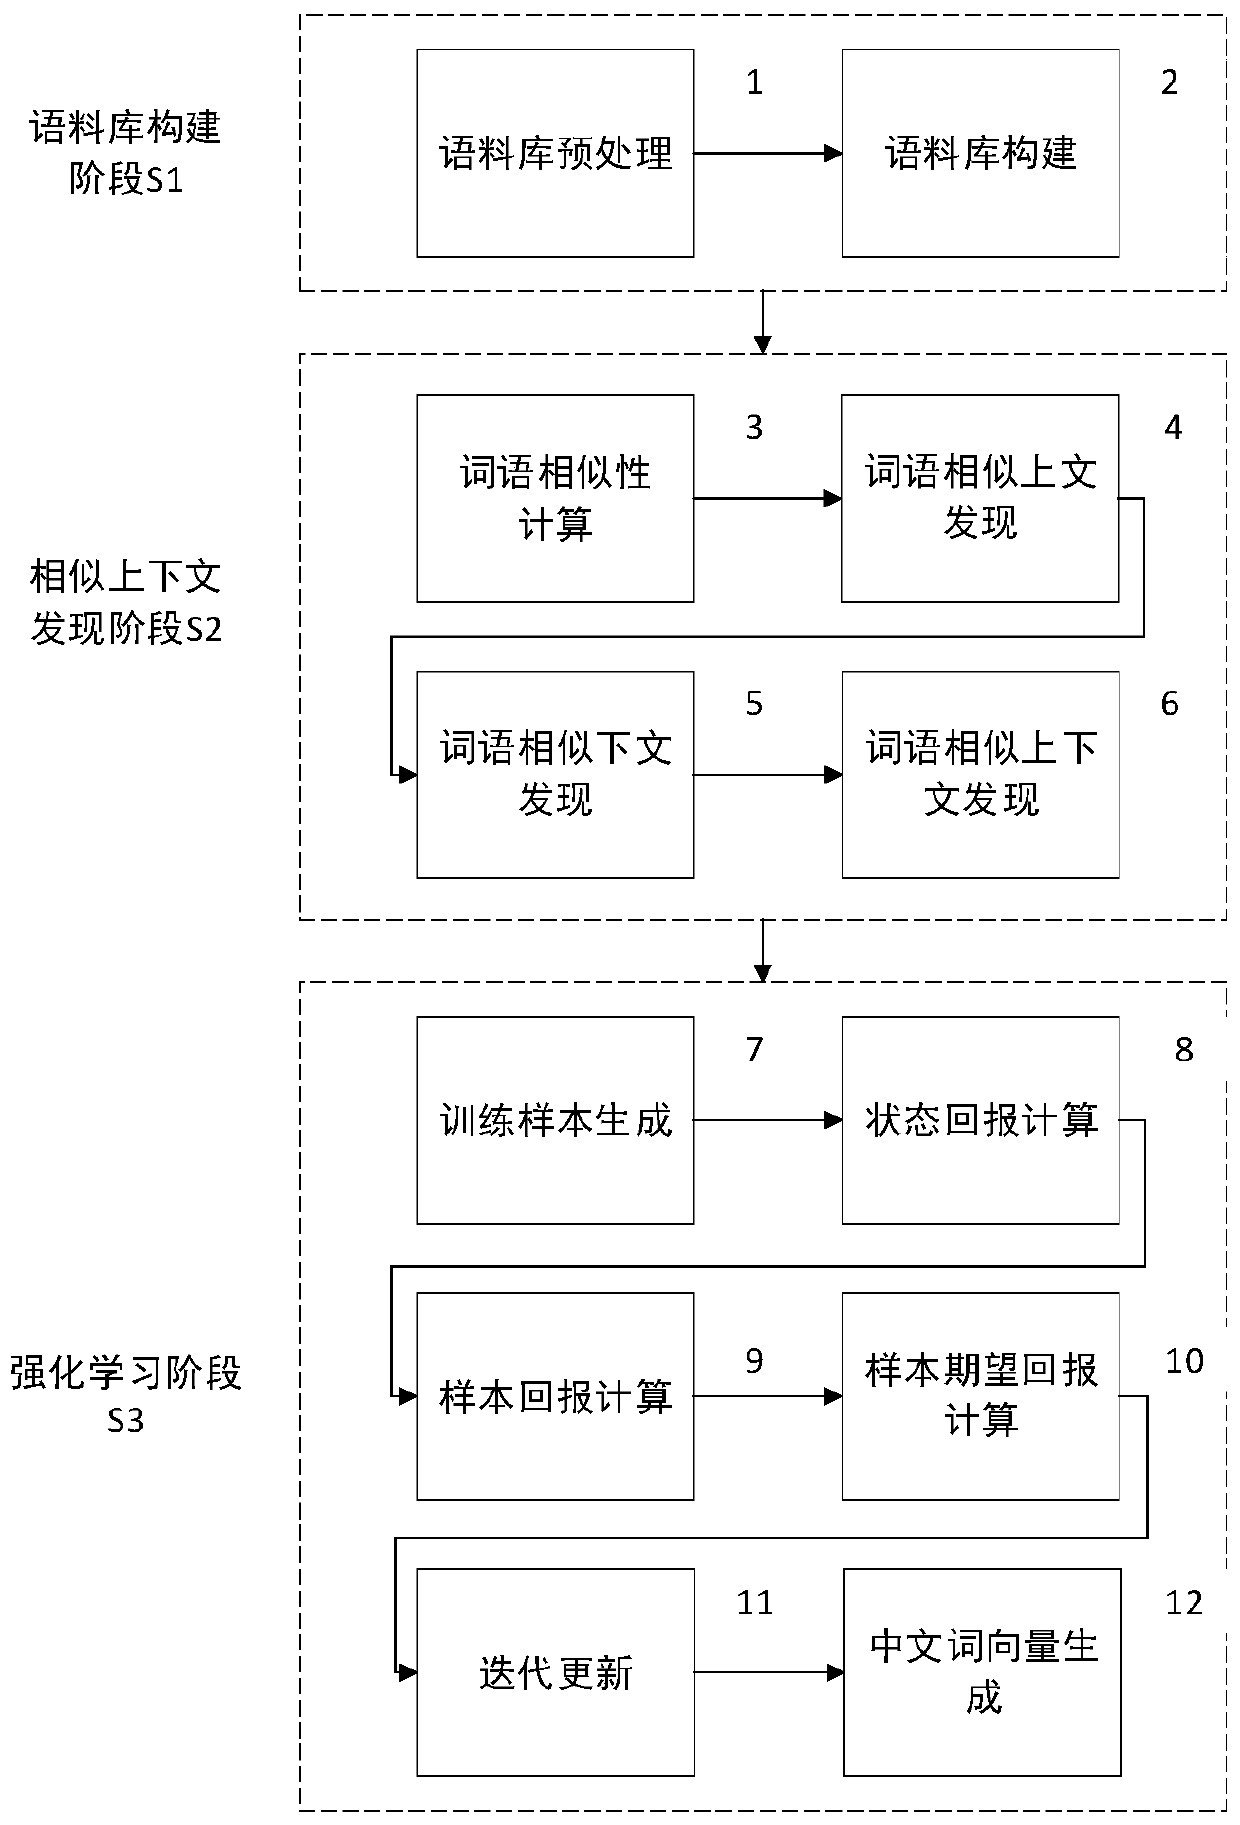 Chinese word vector generation method based on similar contexts and reinforcement learning